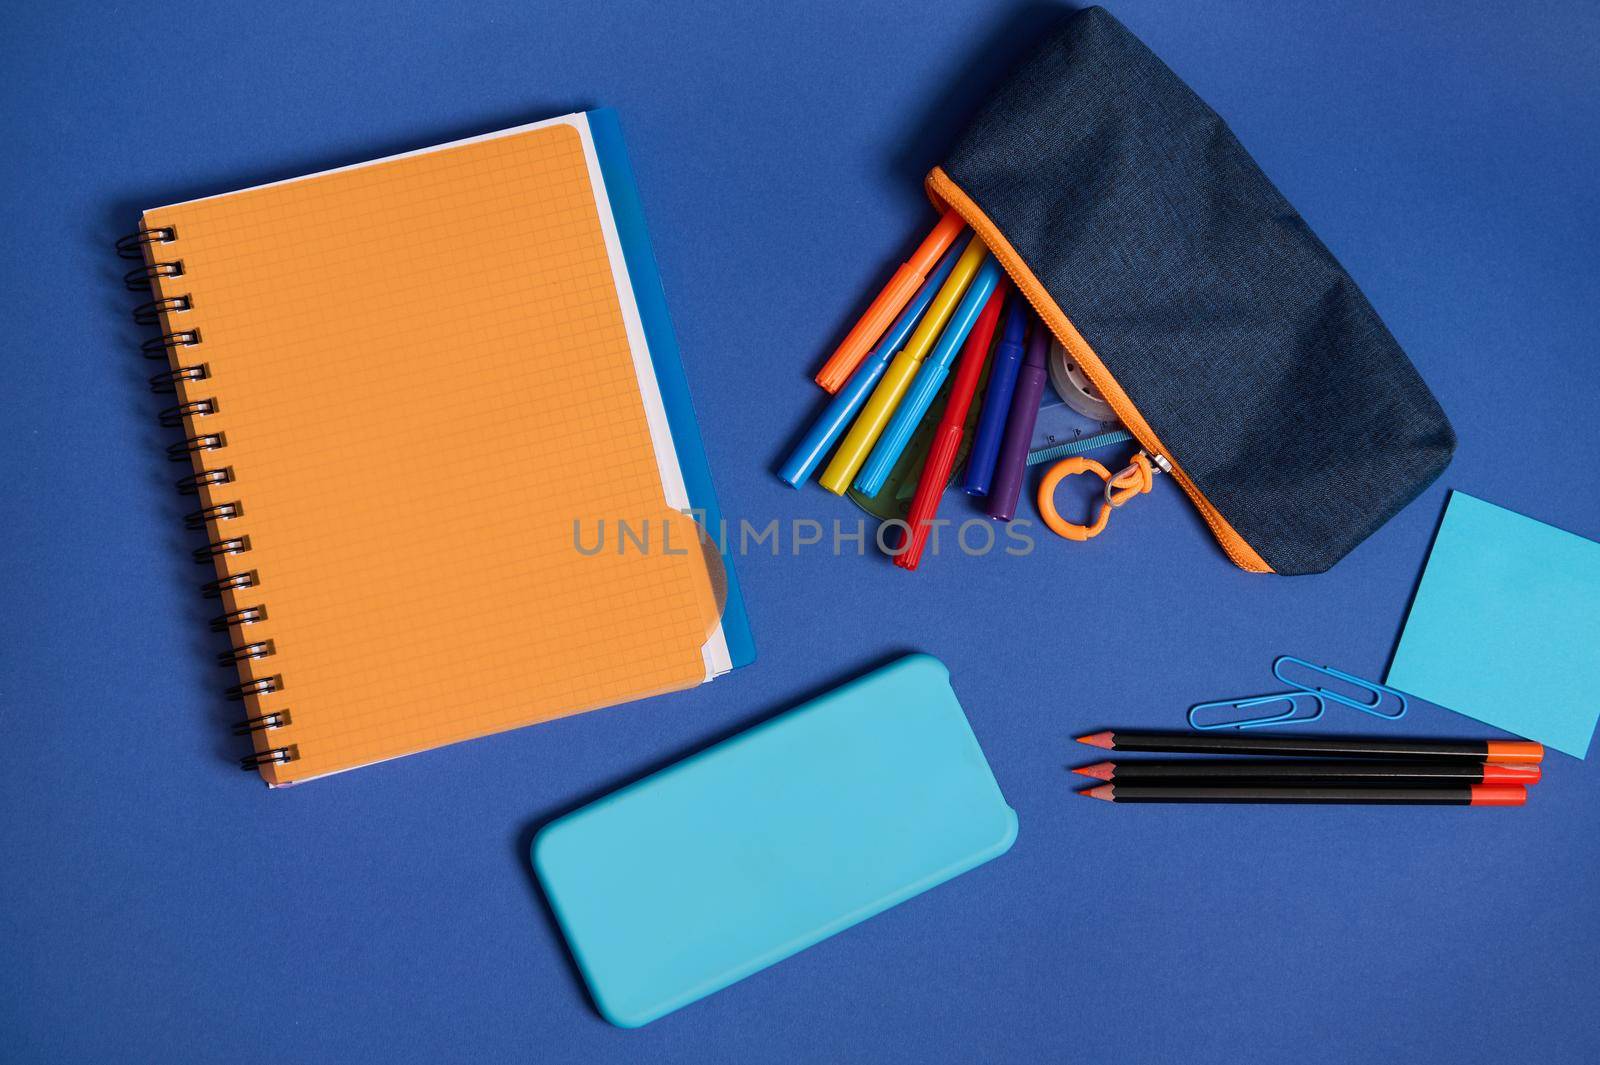 School office supplies and a smartphone lying screen down on a blue background . Flat lay composition of stationery in two contrasting colors, blue and orange with copy space by artgf